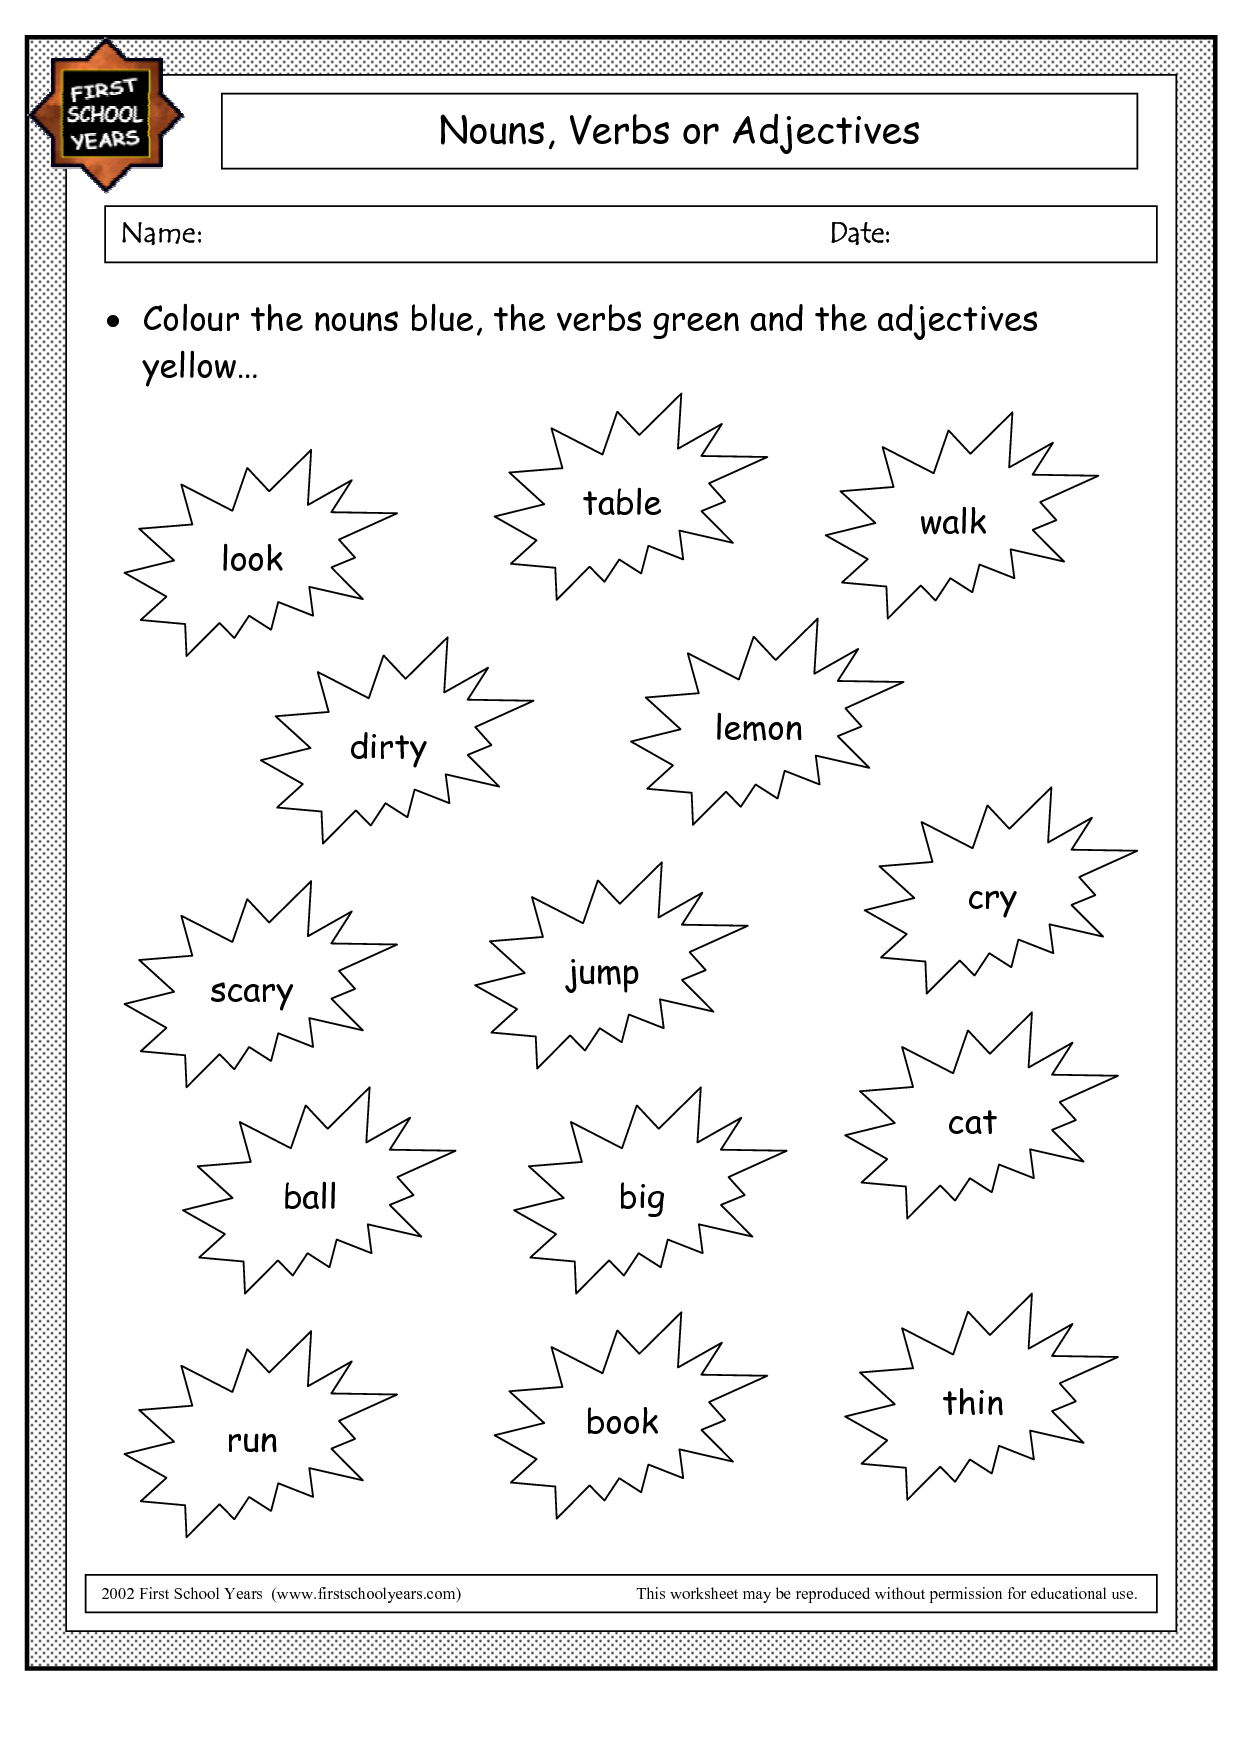 16-best-images-of-verbs-and-adverbs-worksheets-adverbs-and-adjectives